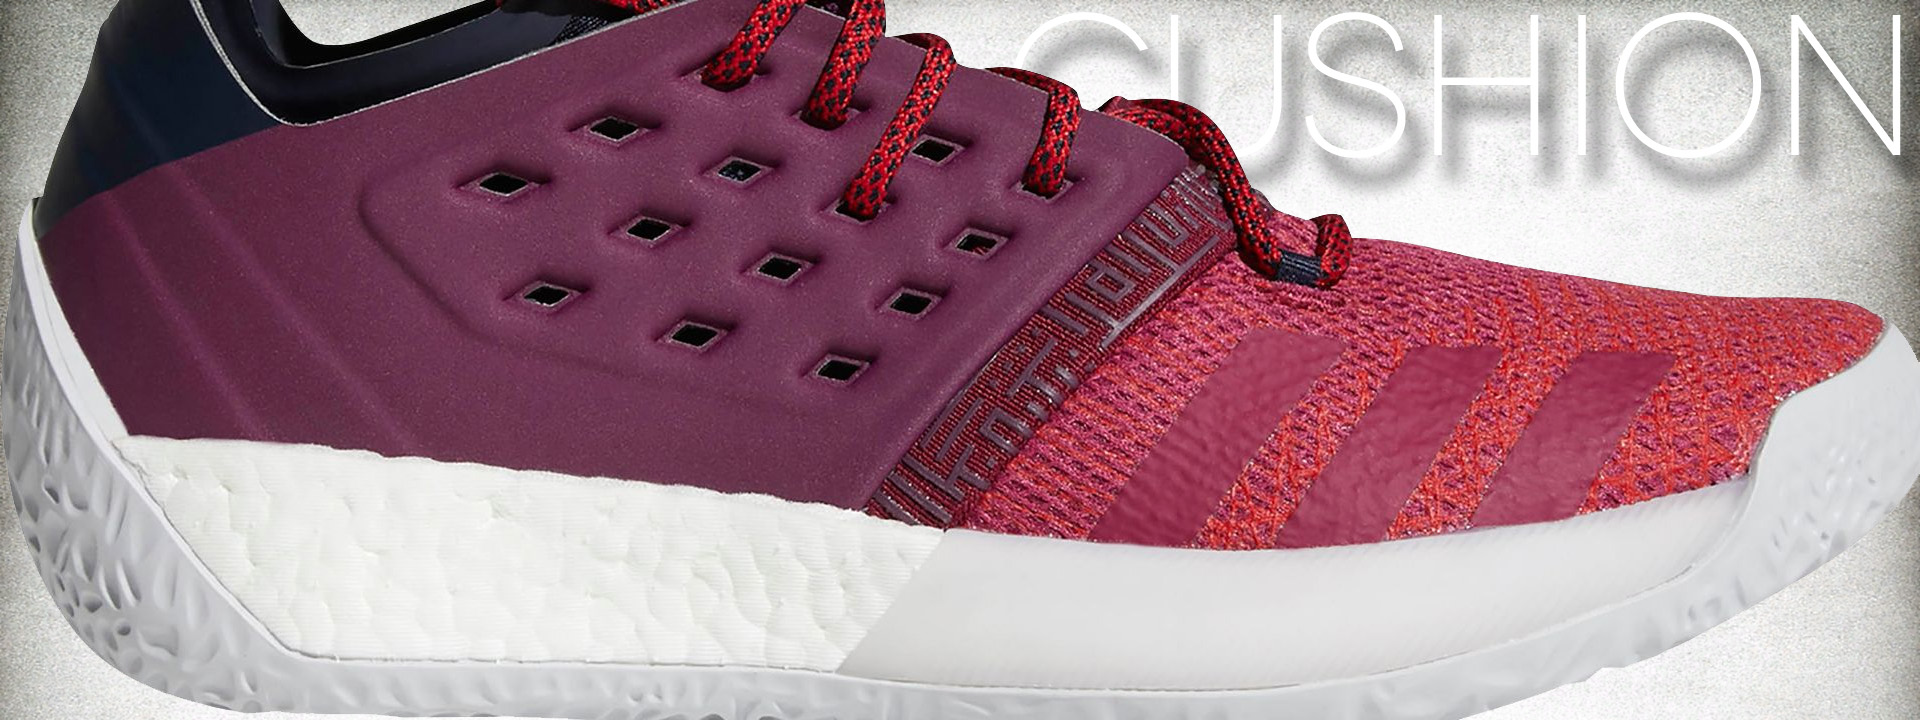 adidas Harden Vol 2 Performance Review cushion